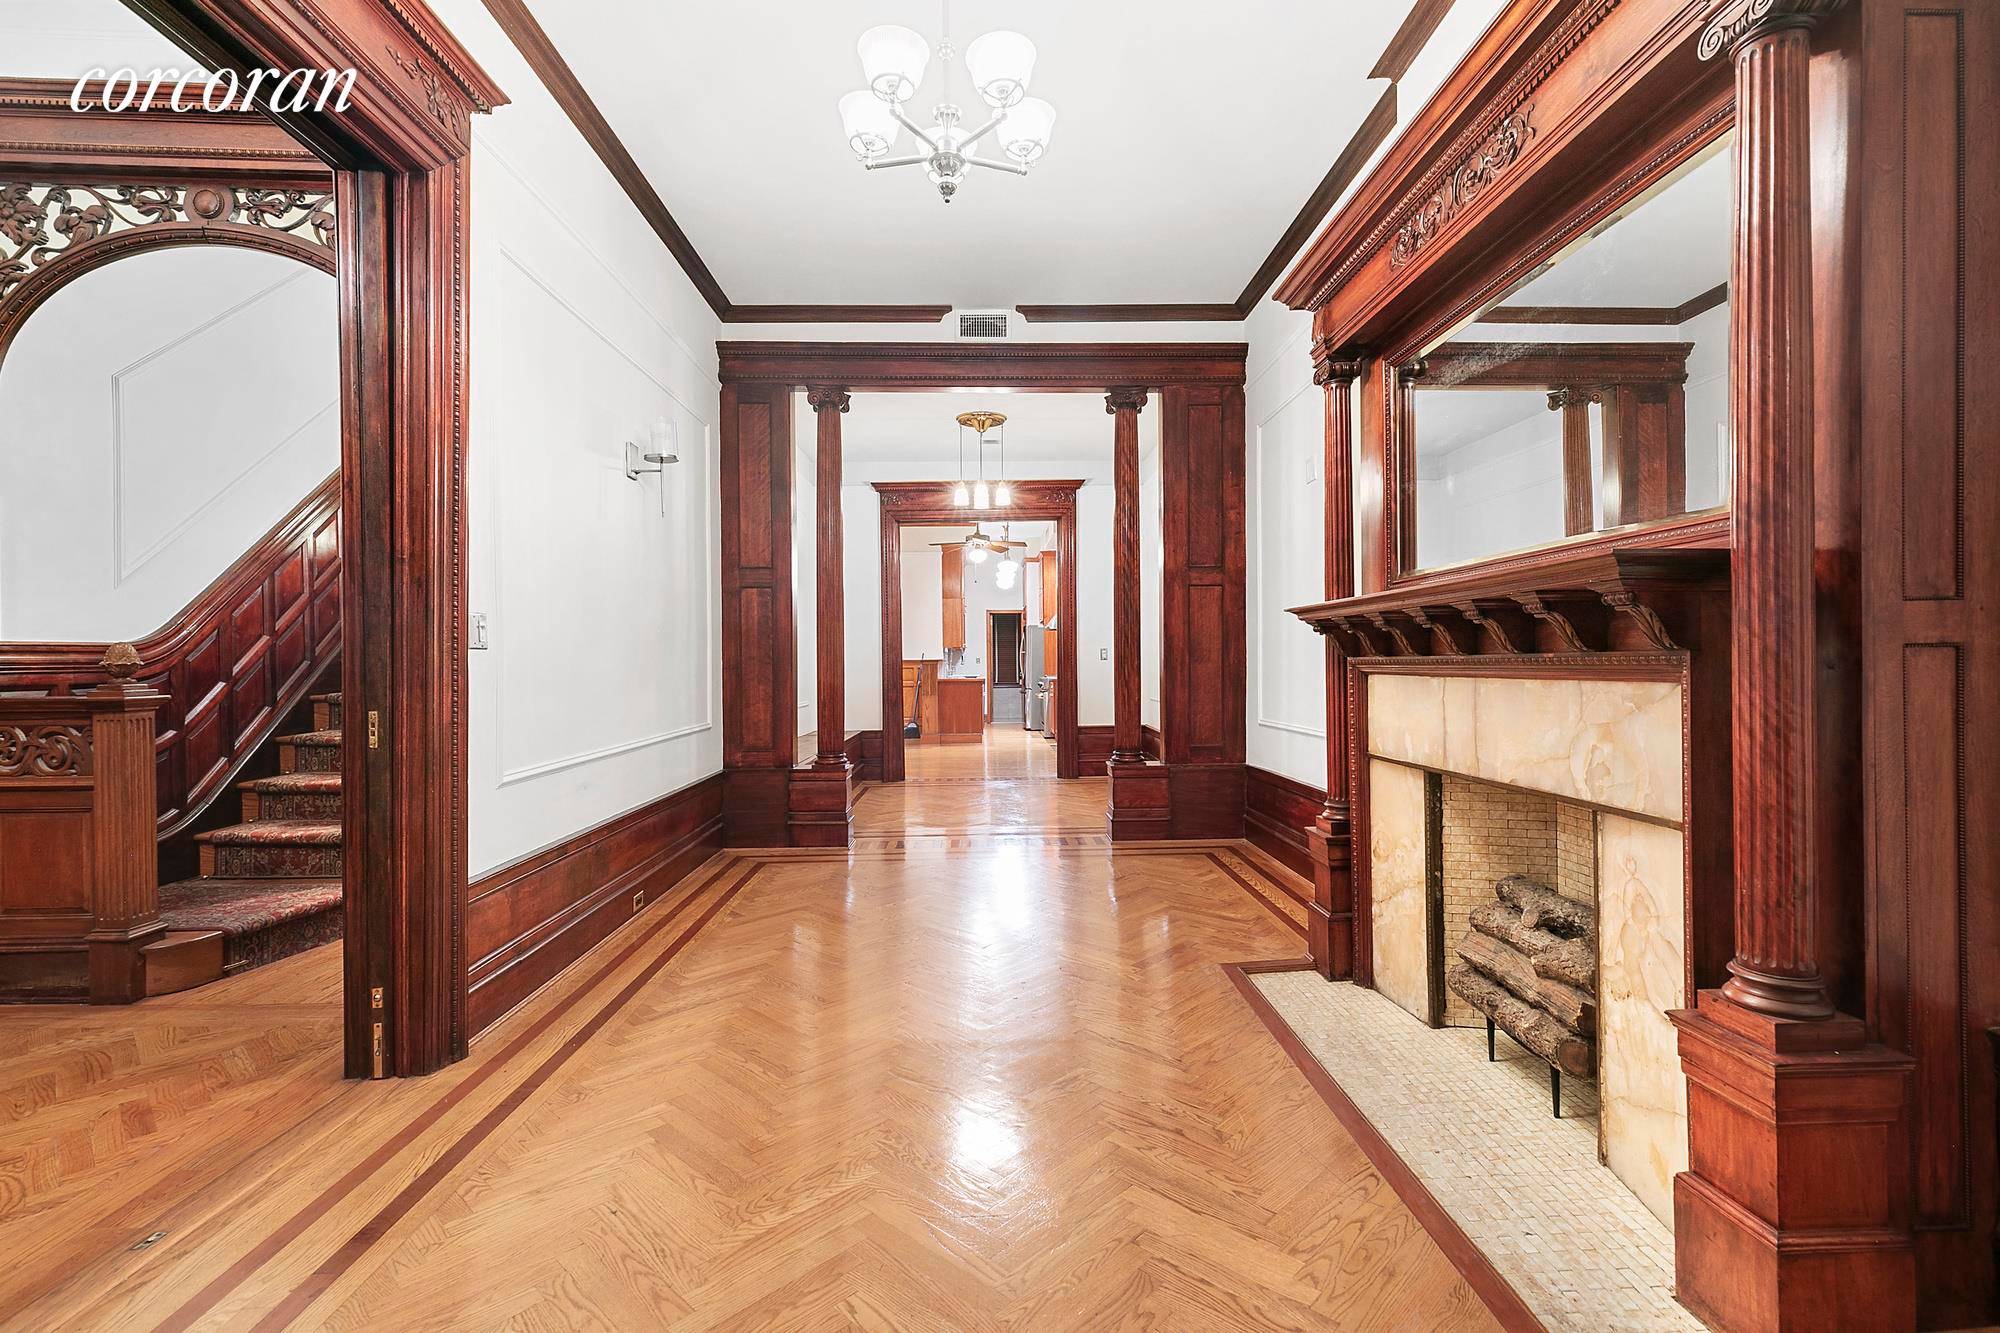 Imagine coming home to a gorgeous triplex apartment inside a 19ft Wide Beautiful Brownstone in Central Harlem.